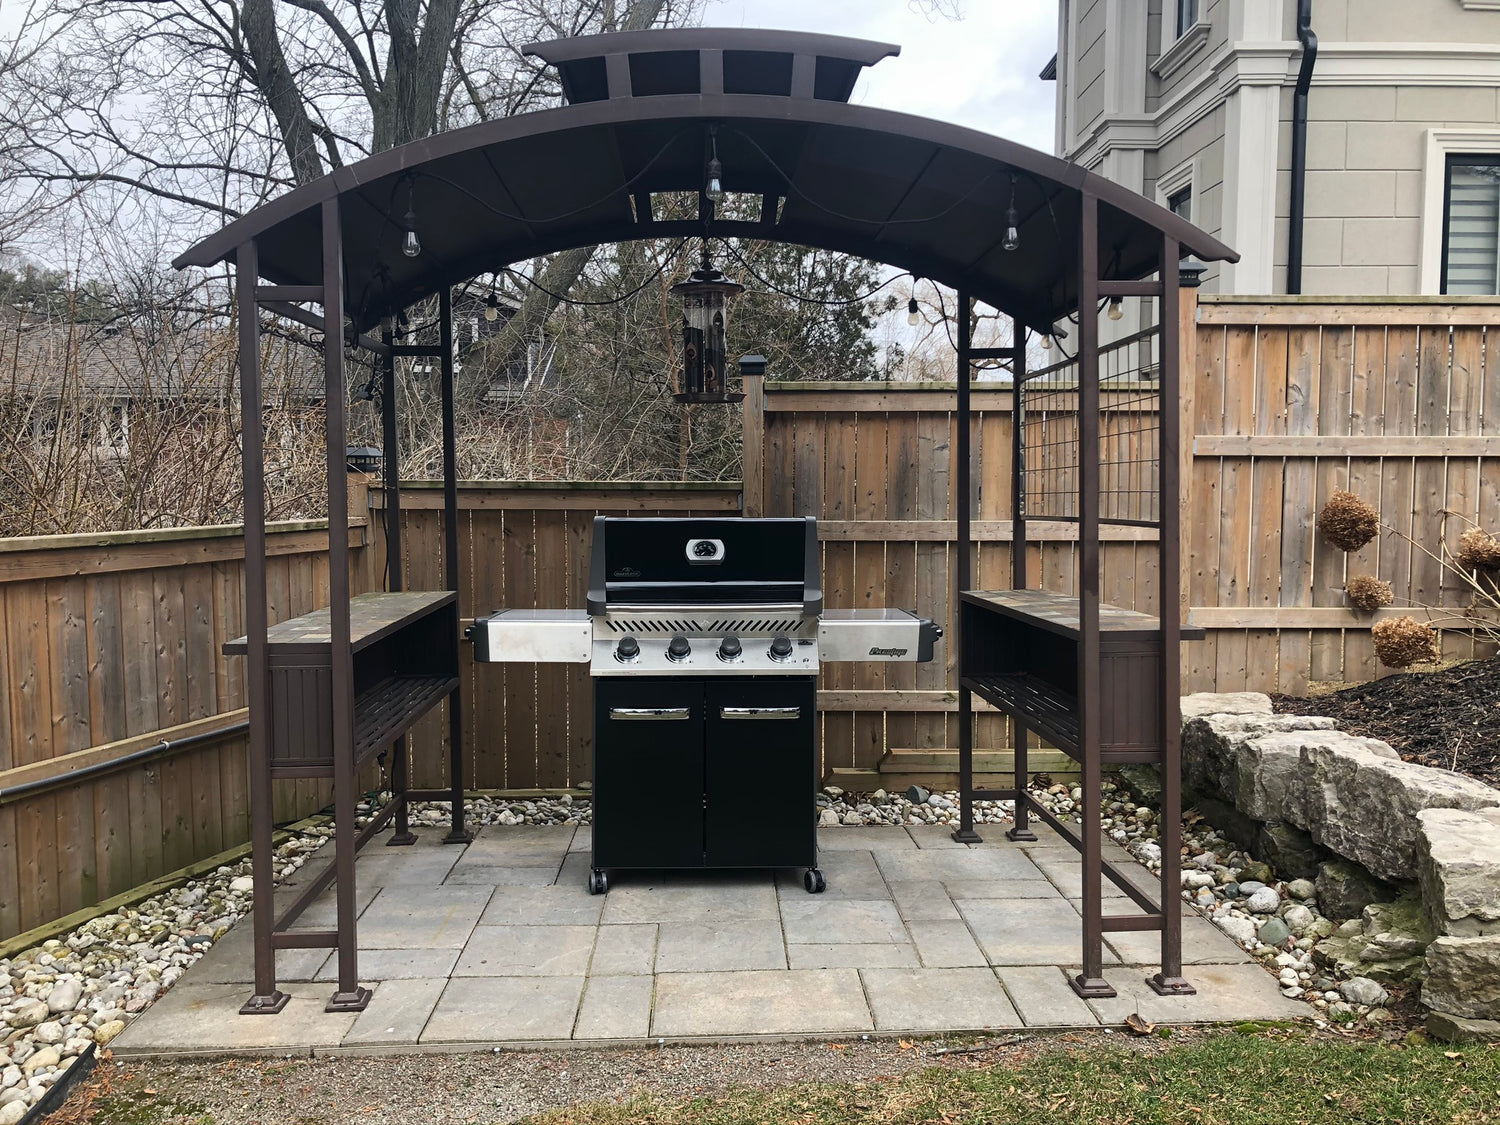 Napoleon Prestige P500 - Natural Gas | One of our summer time hits here, this BBQ is packed full of features and value | Barbecues Galore: Burlington, Oakville, Etobicoke & Calgary